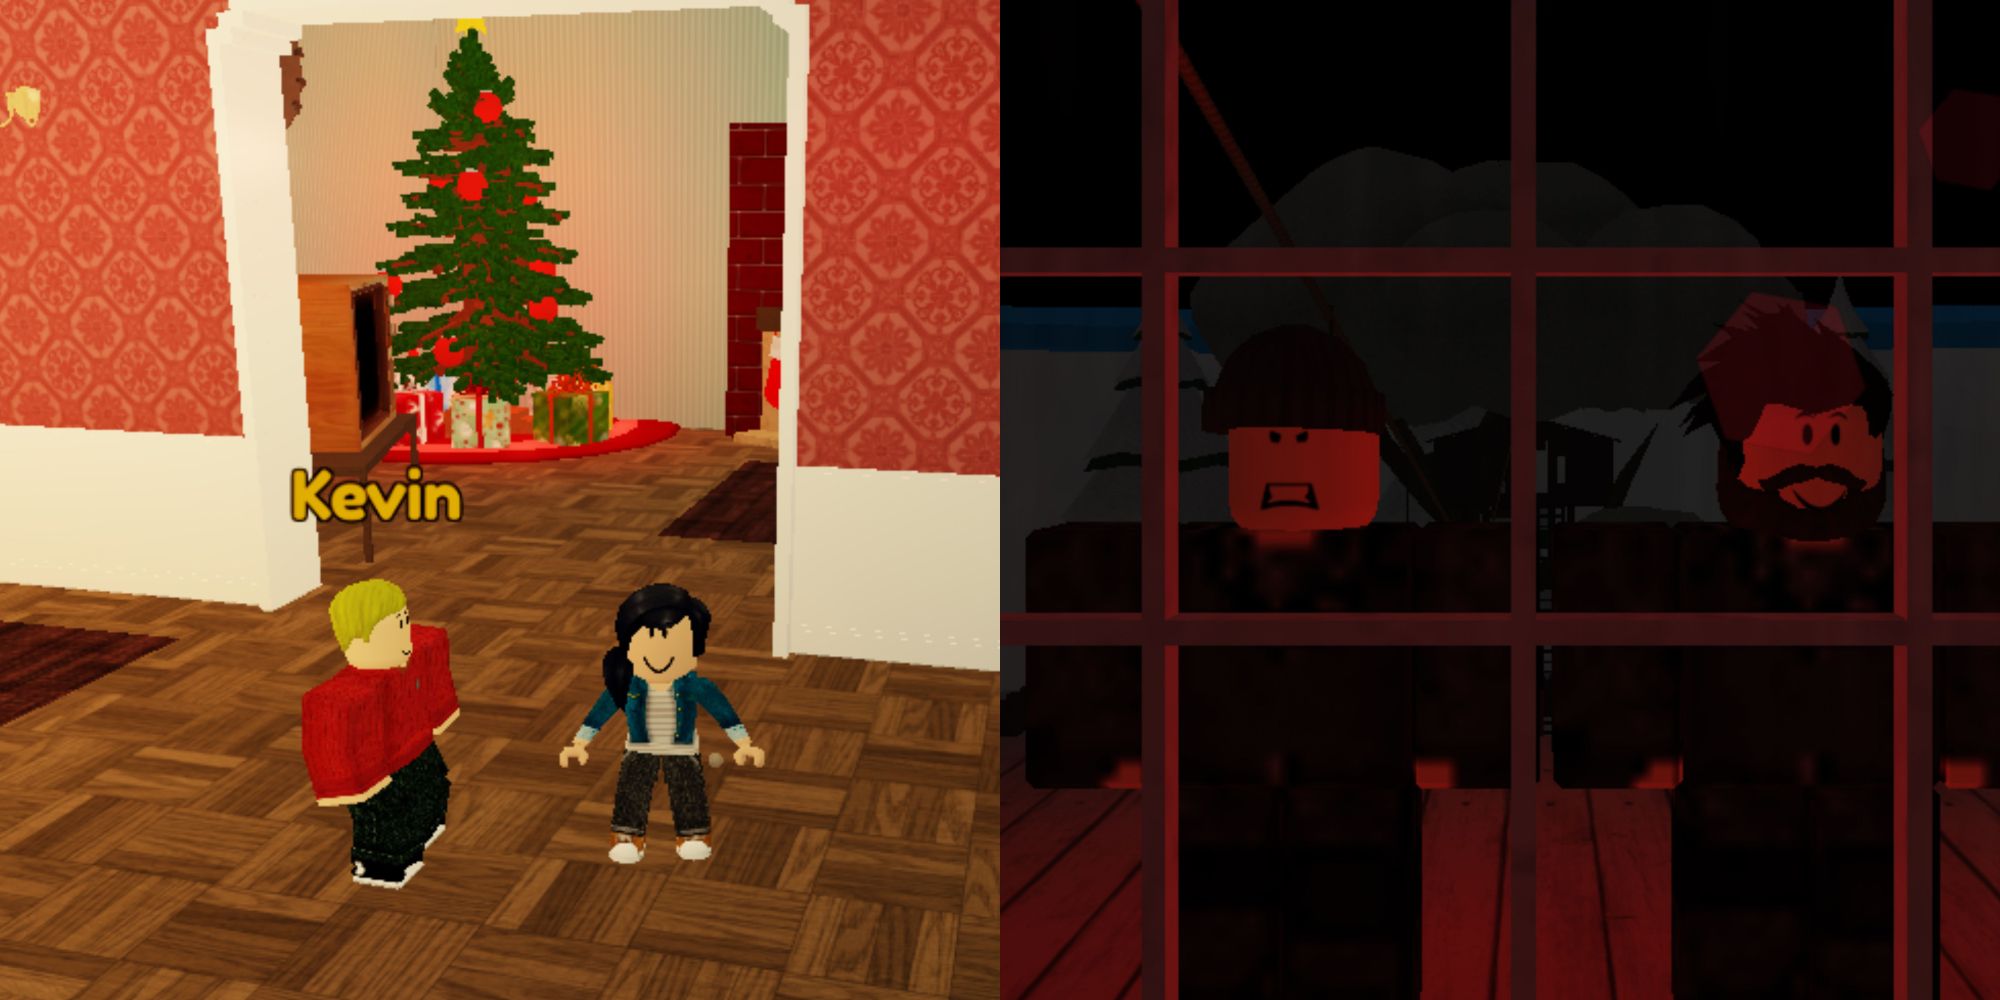 Kevin from Home alone and Roblox character standing, and two burglars staring from outside the window